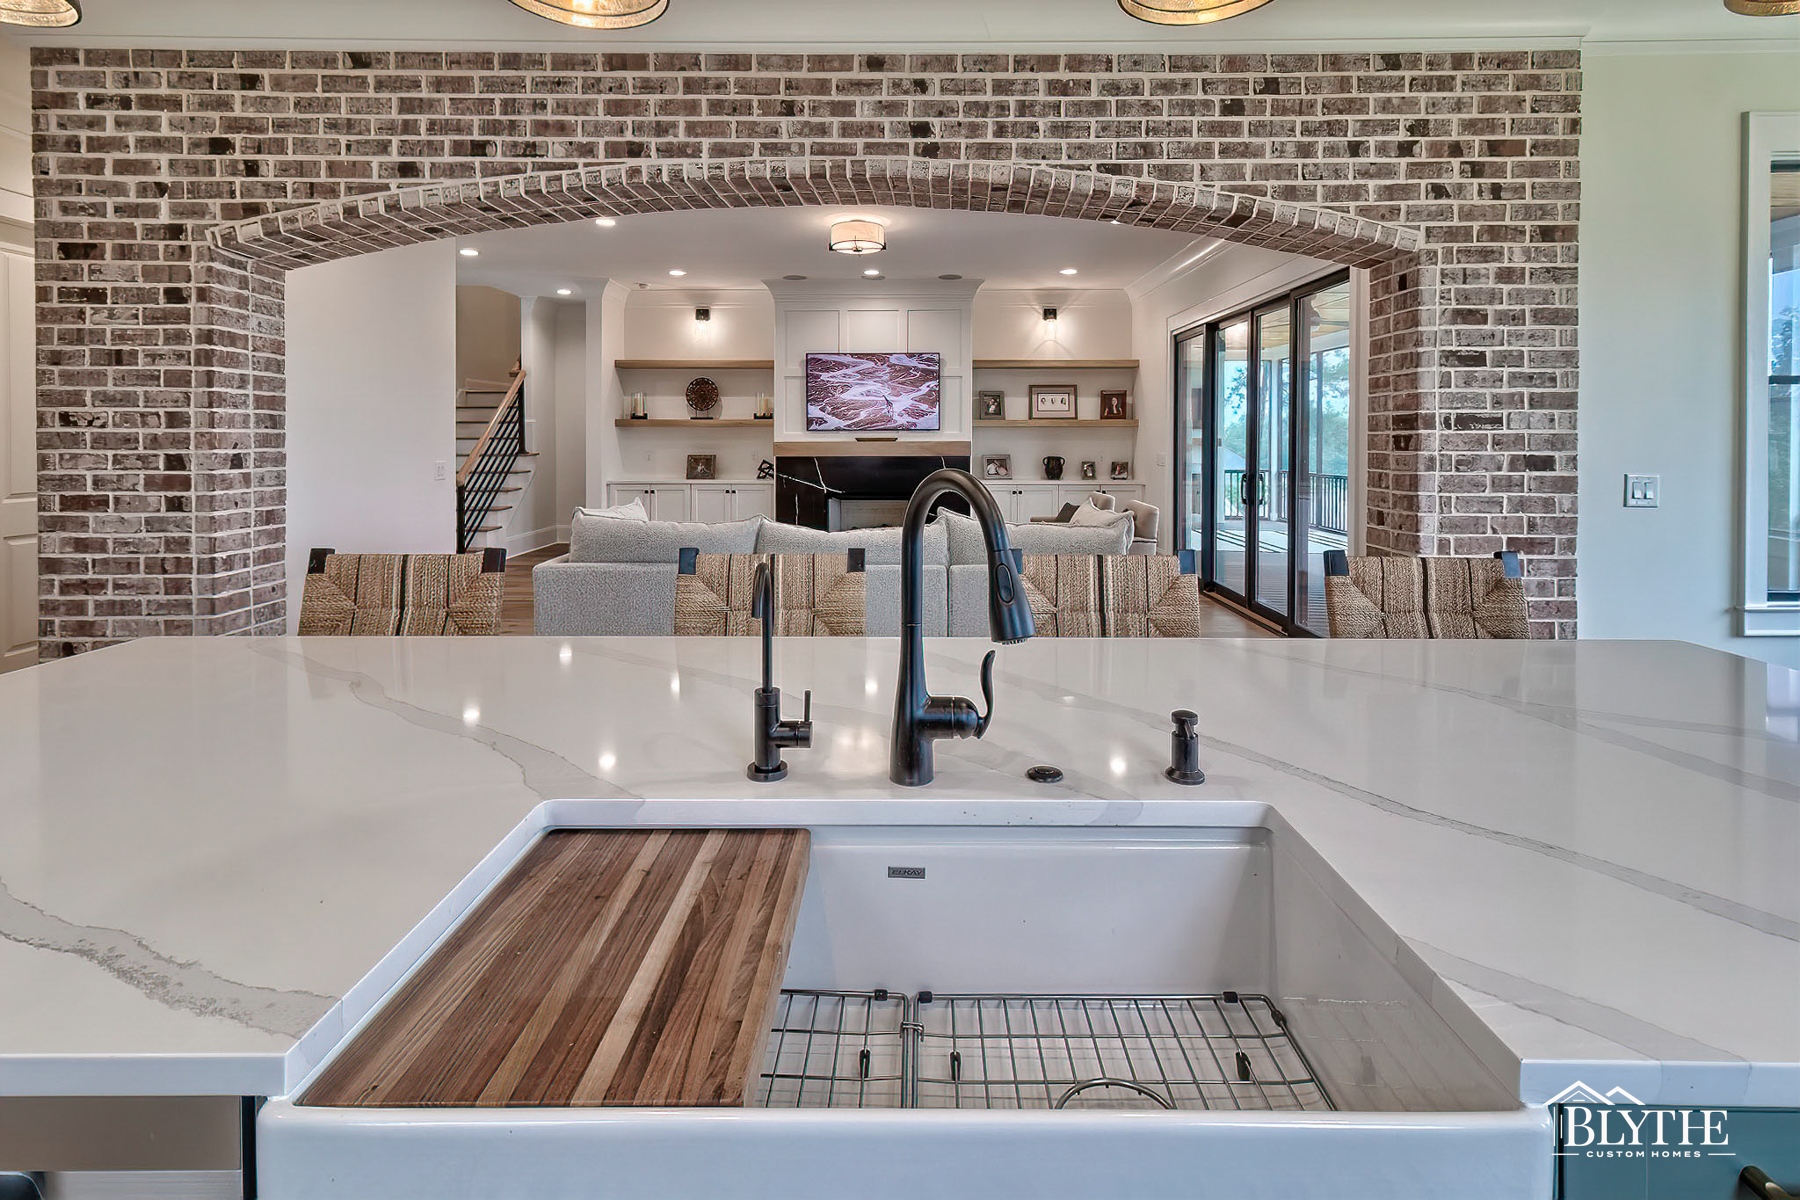 White farmhouse sink with wood cutting board insert, antique bronze-look faucet, and white quartz counter with light gray veining and large brick archway leading to the living space with fireplace and built-ins.